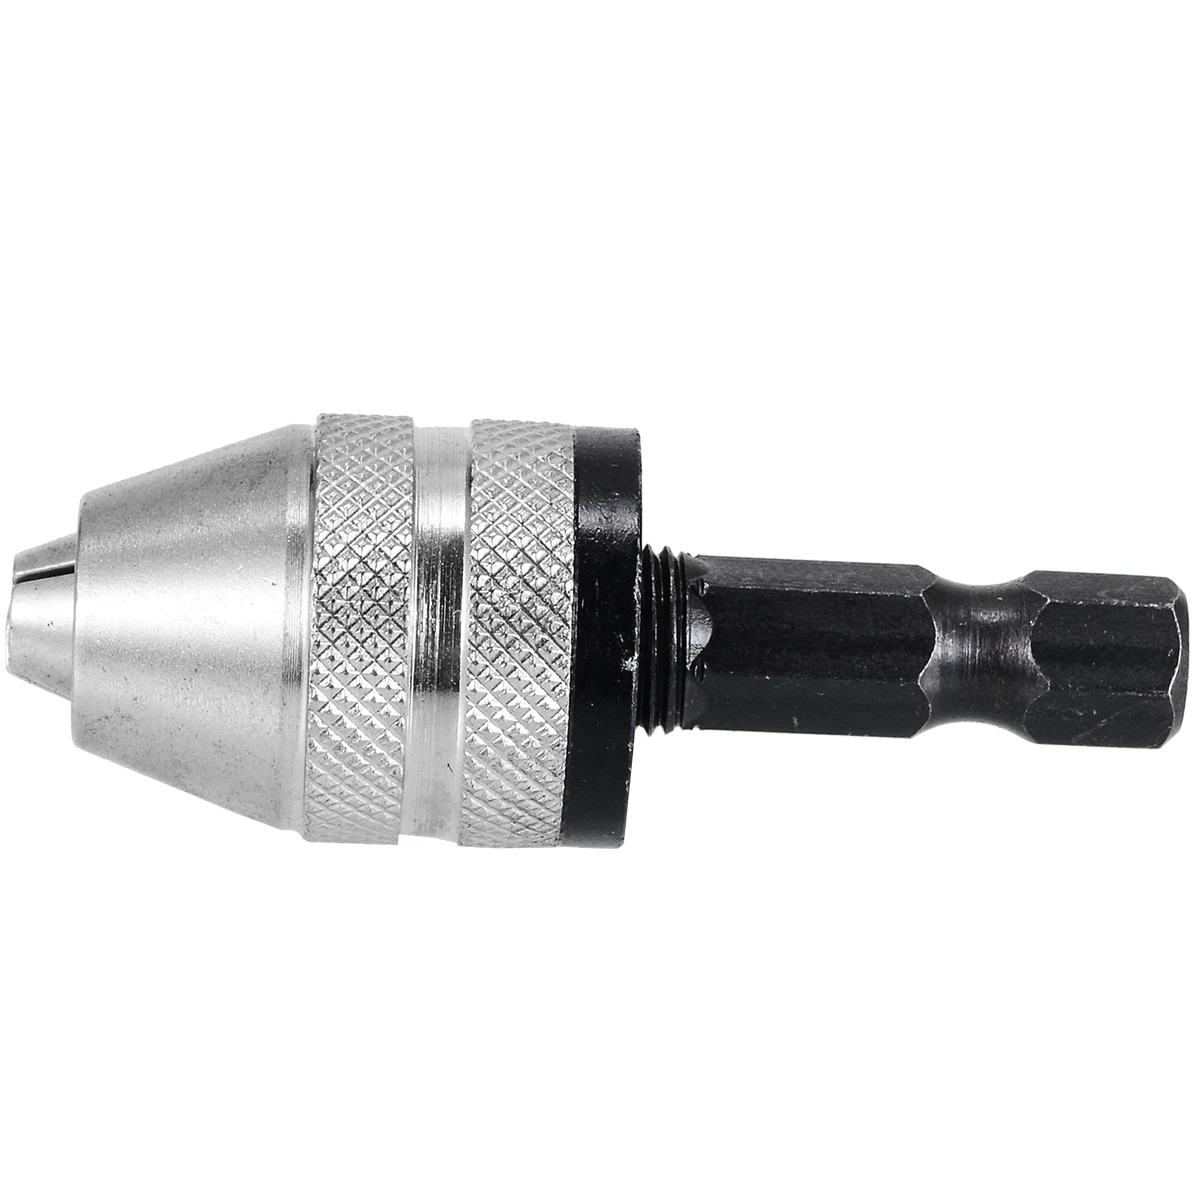 Quick Change Convertor Adapter Chuck Hex Shank Hand Keyless Drill Bits For Power Tools